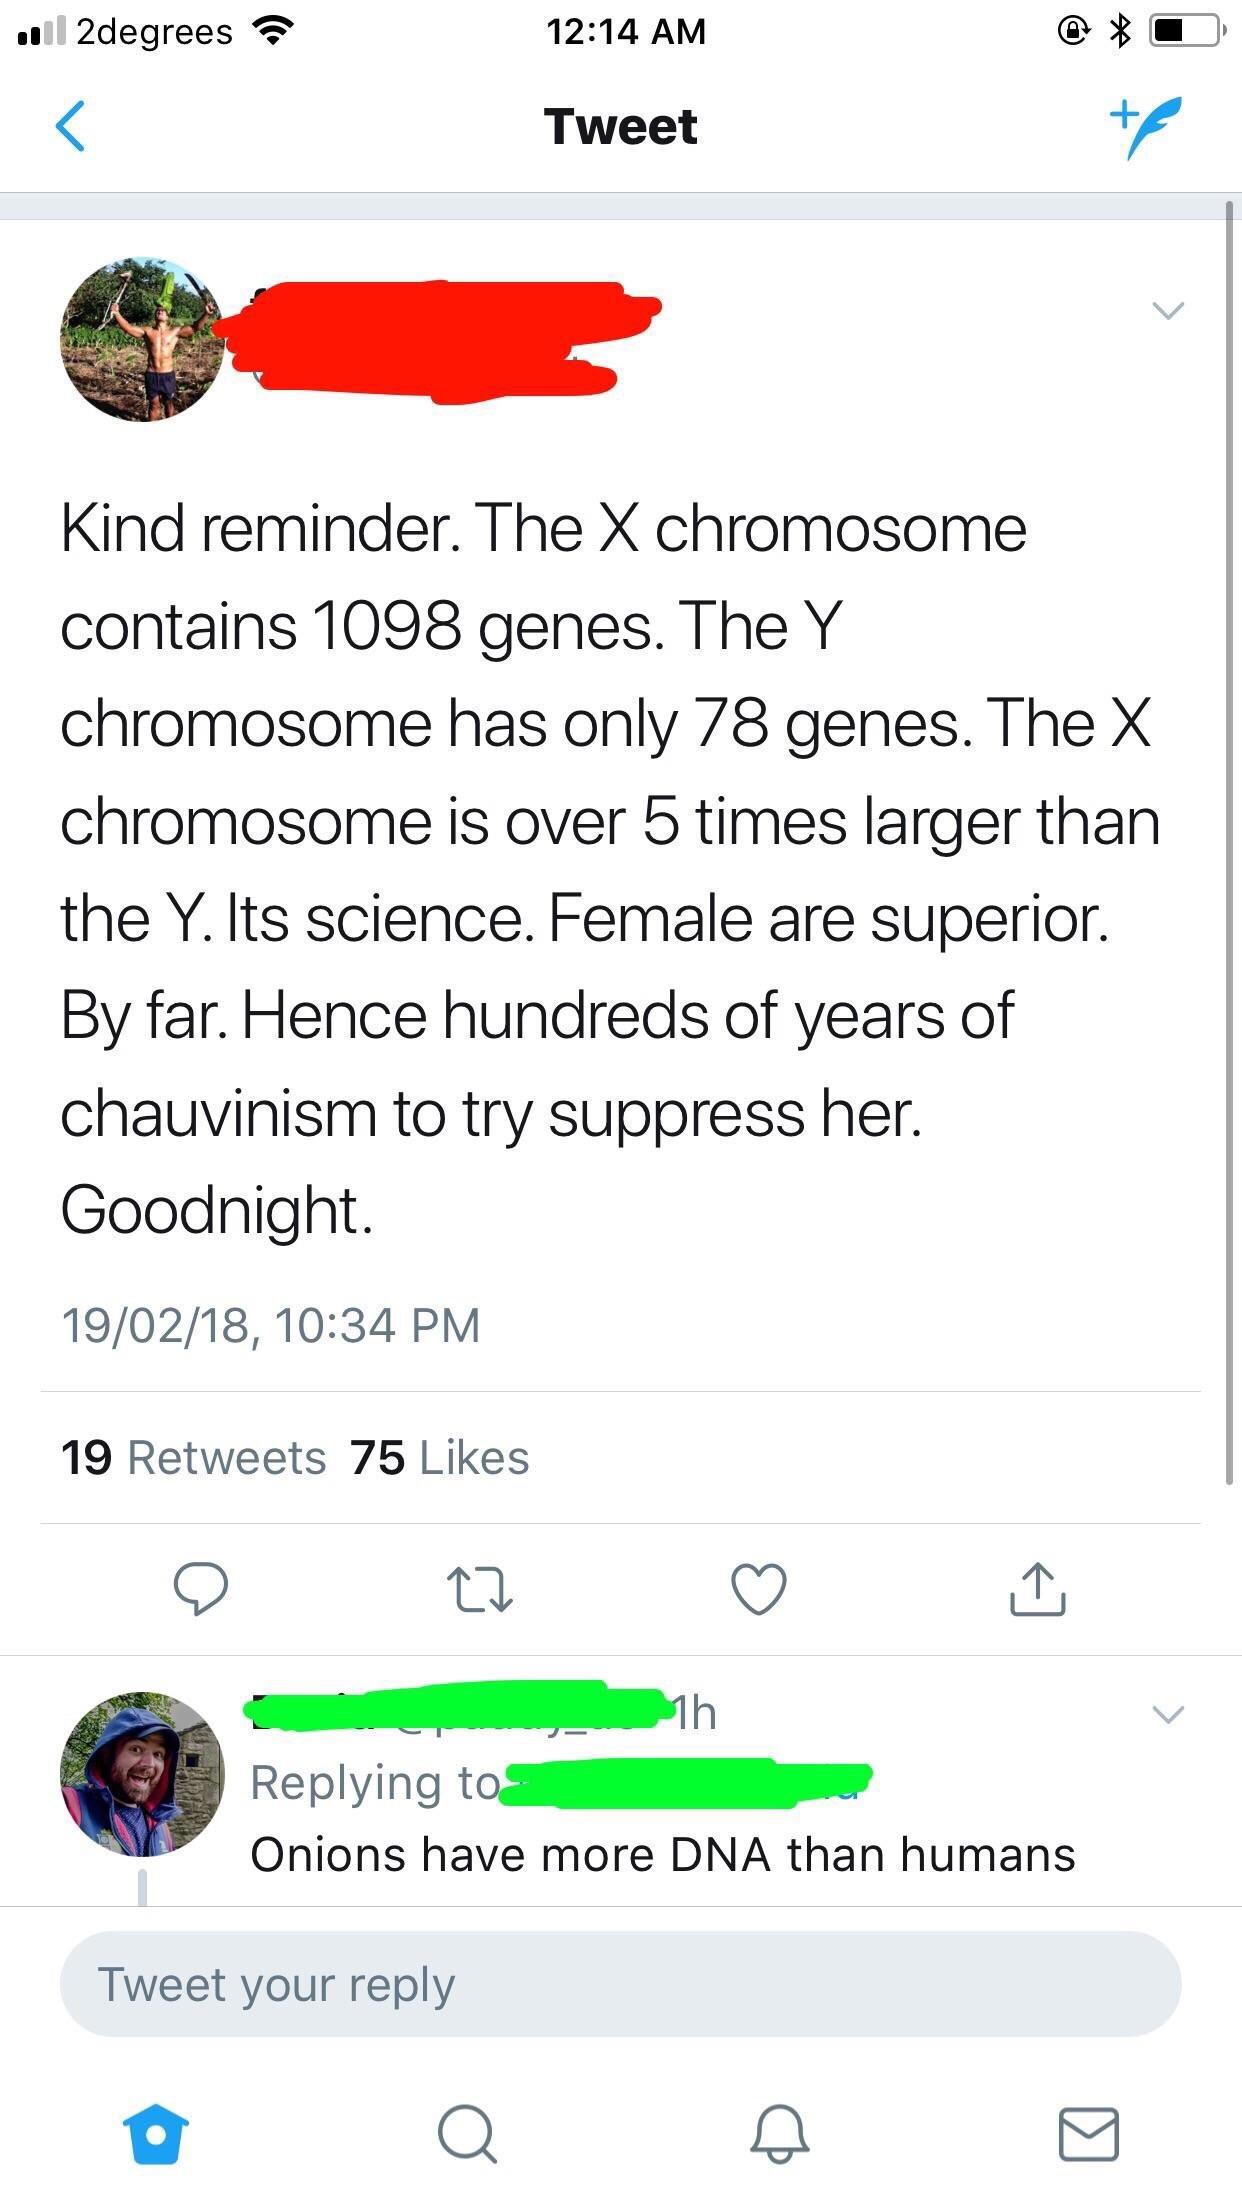 random pic onions have more dna than humans - il 2degrees Tweet Kind reminder. The X chromosome contains 1098 genes. The Y chromosome has only 78 genes. The X chromosome is over 5 times larger than the Y. Its science. Female are superior. By far. Hence hu